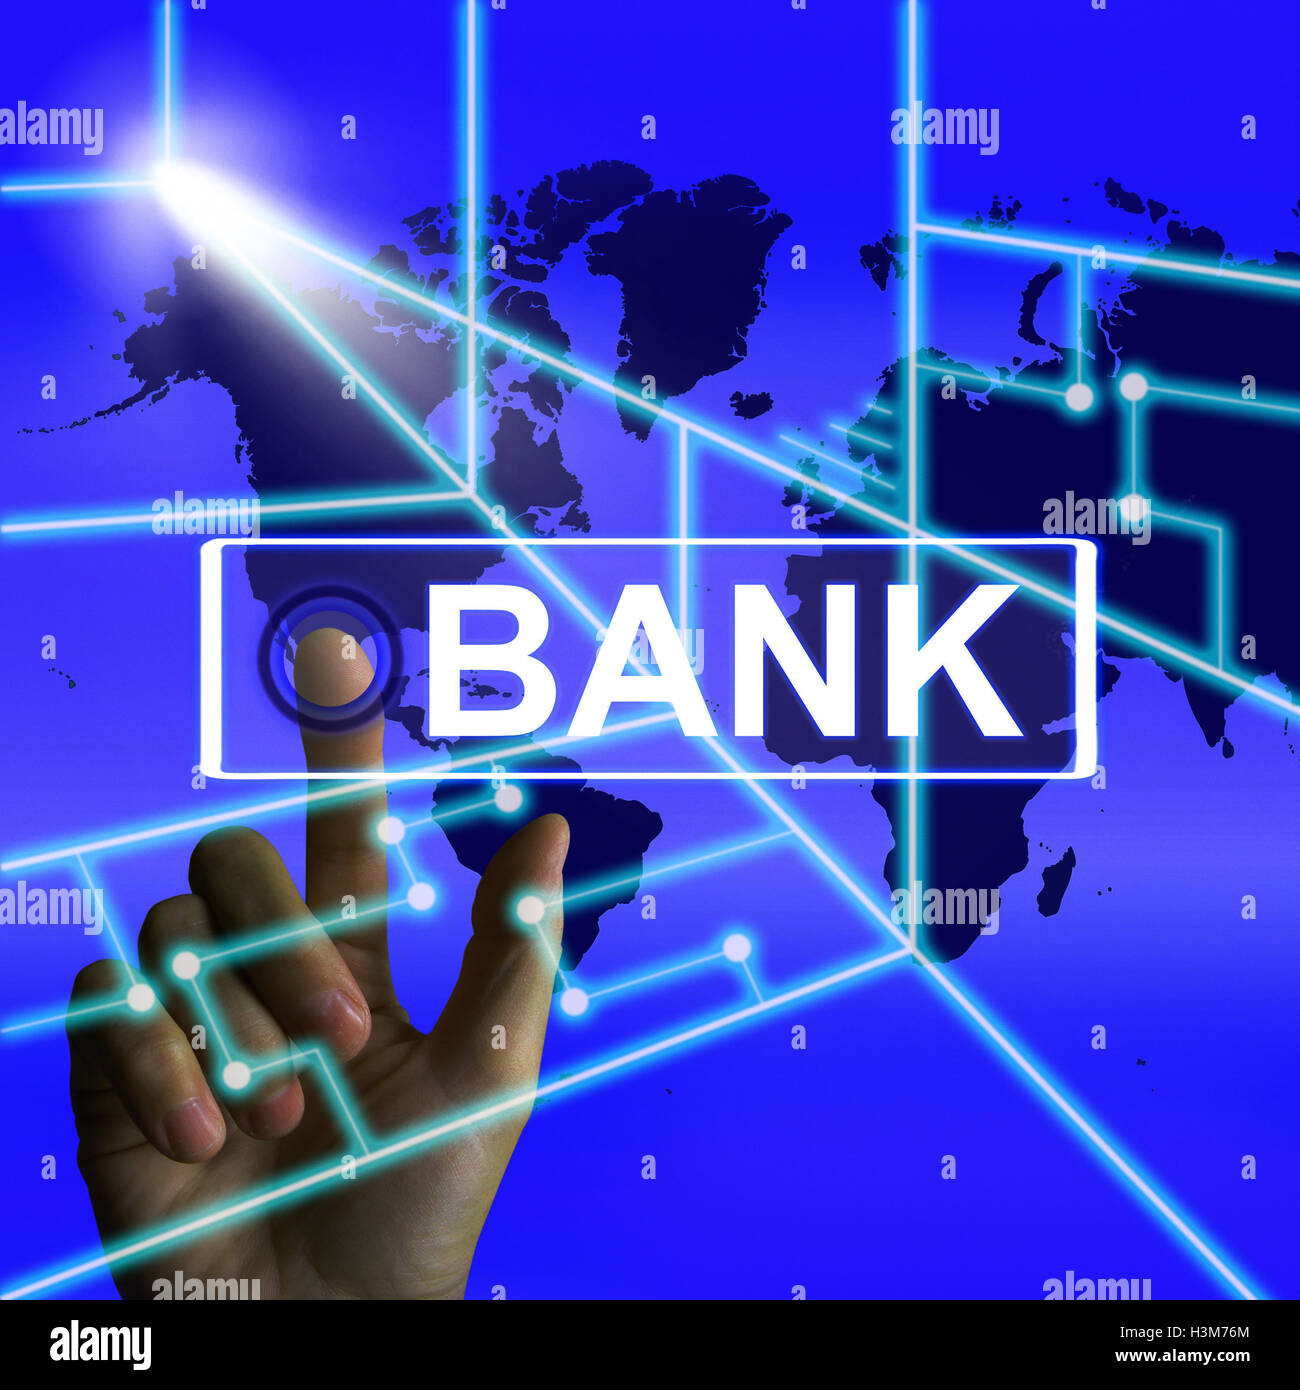 Bank Screen Indicates Online and Internet Banking Stock Photo